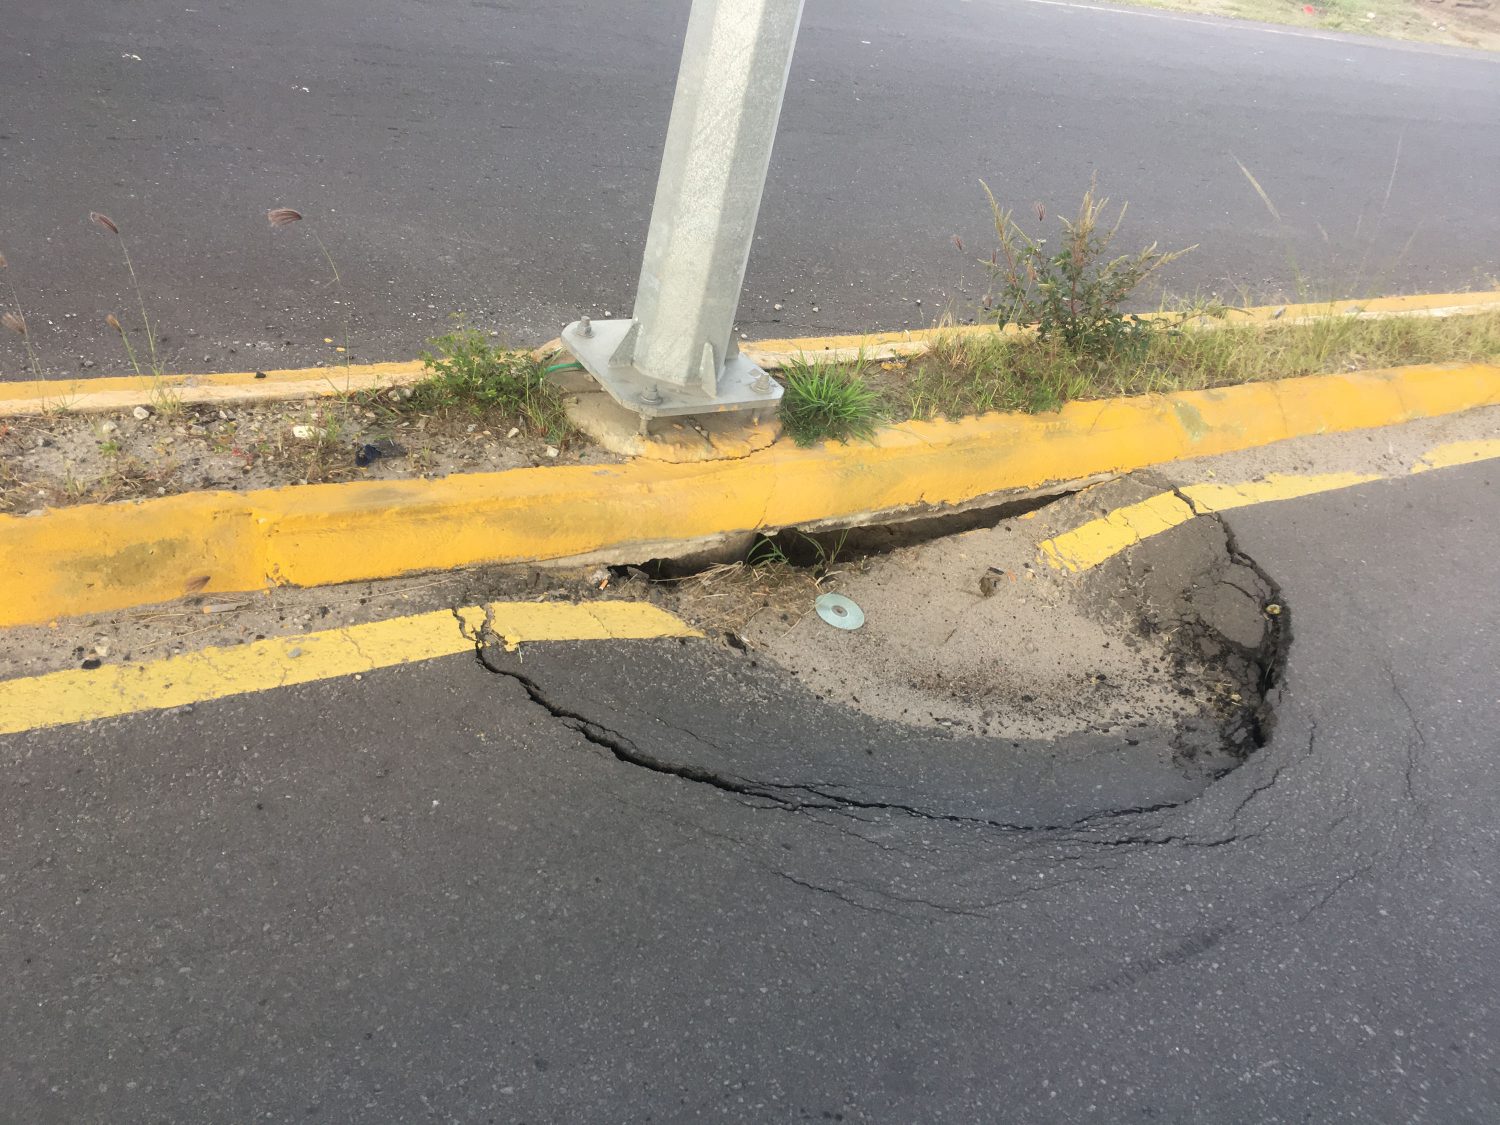 One of the holes which currently obstructs the flow of traffic on Carifesta Avenue 